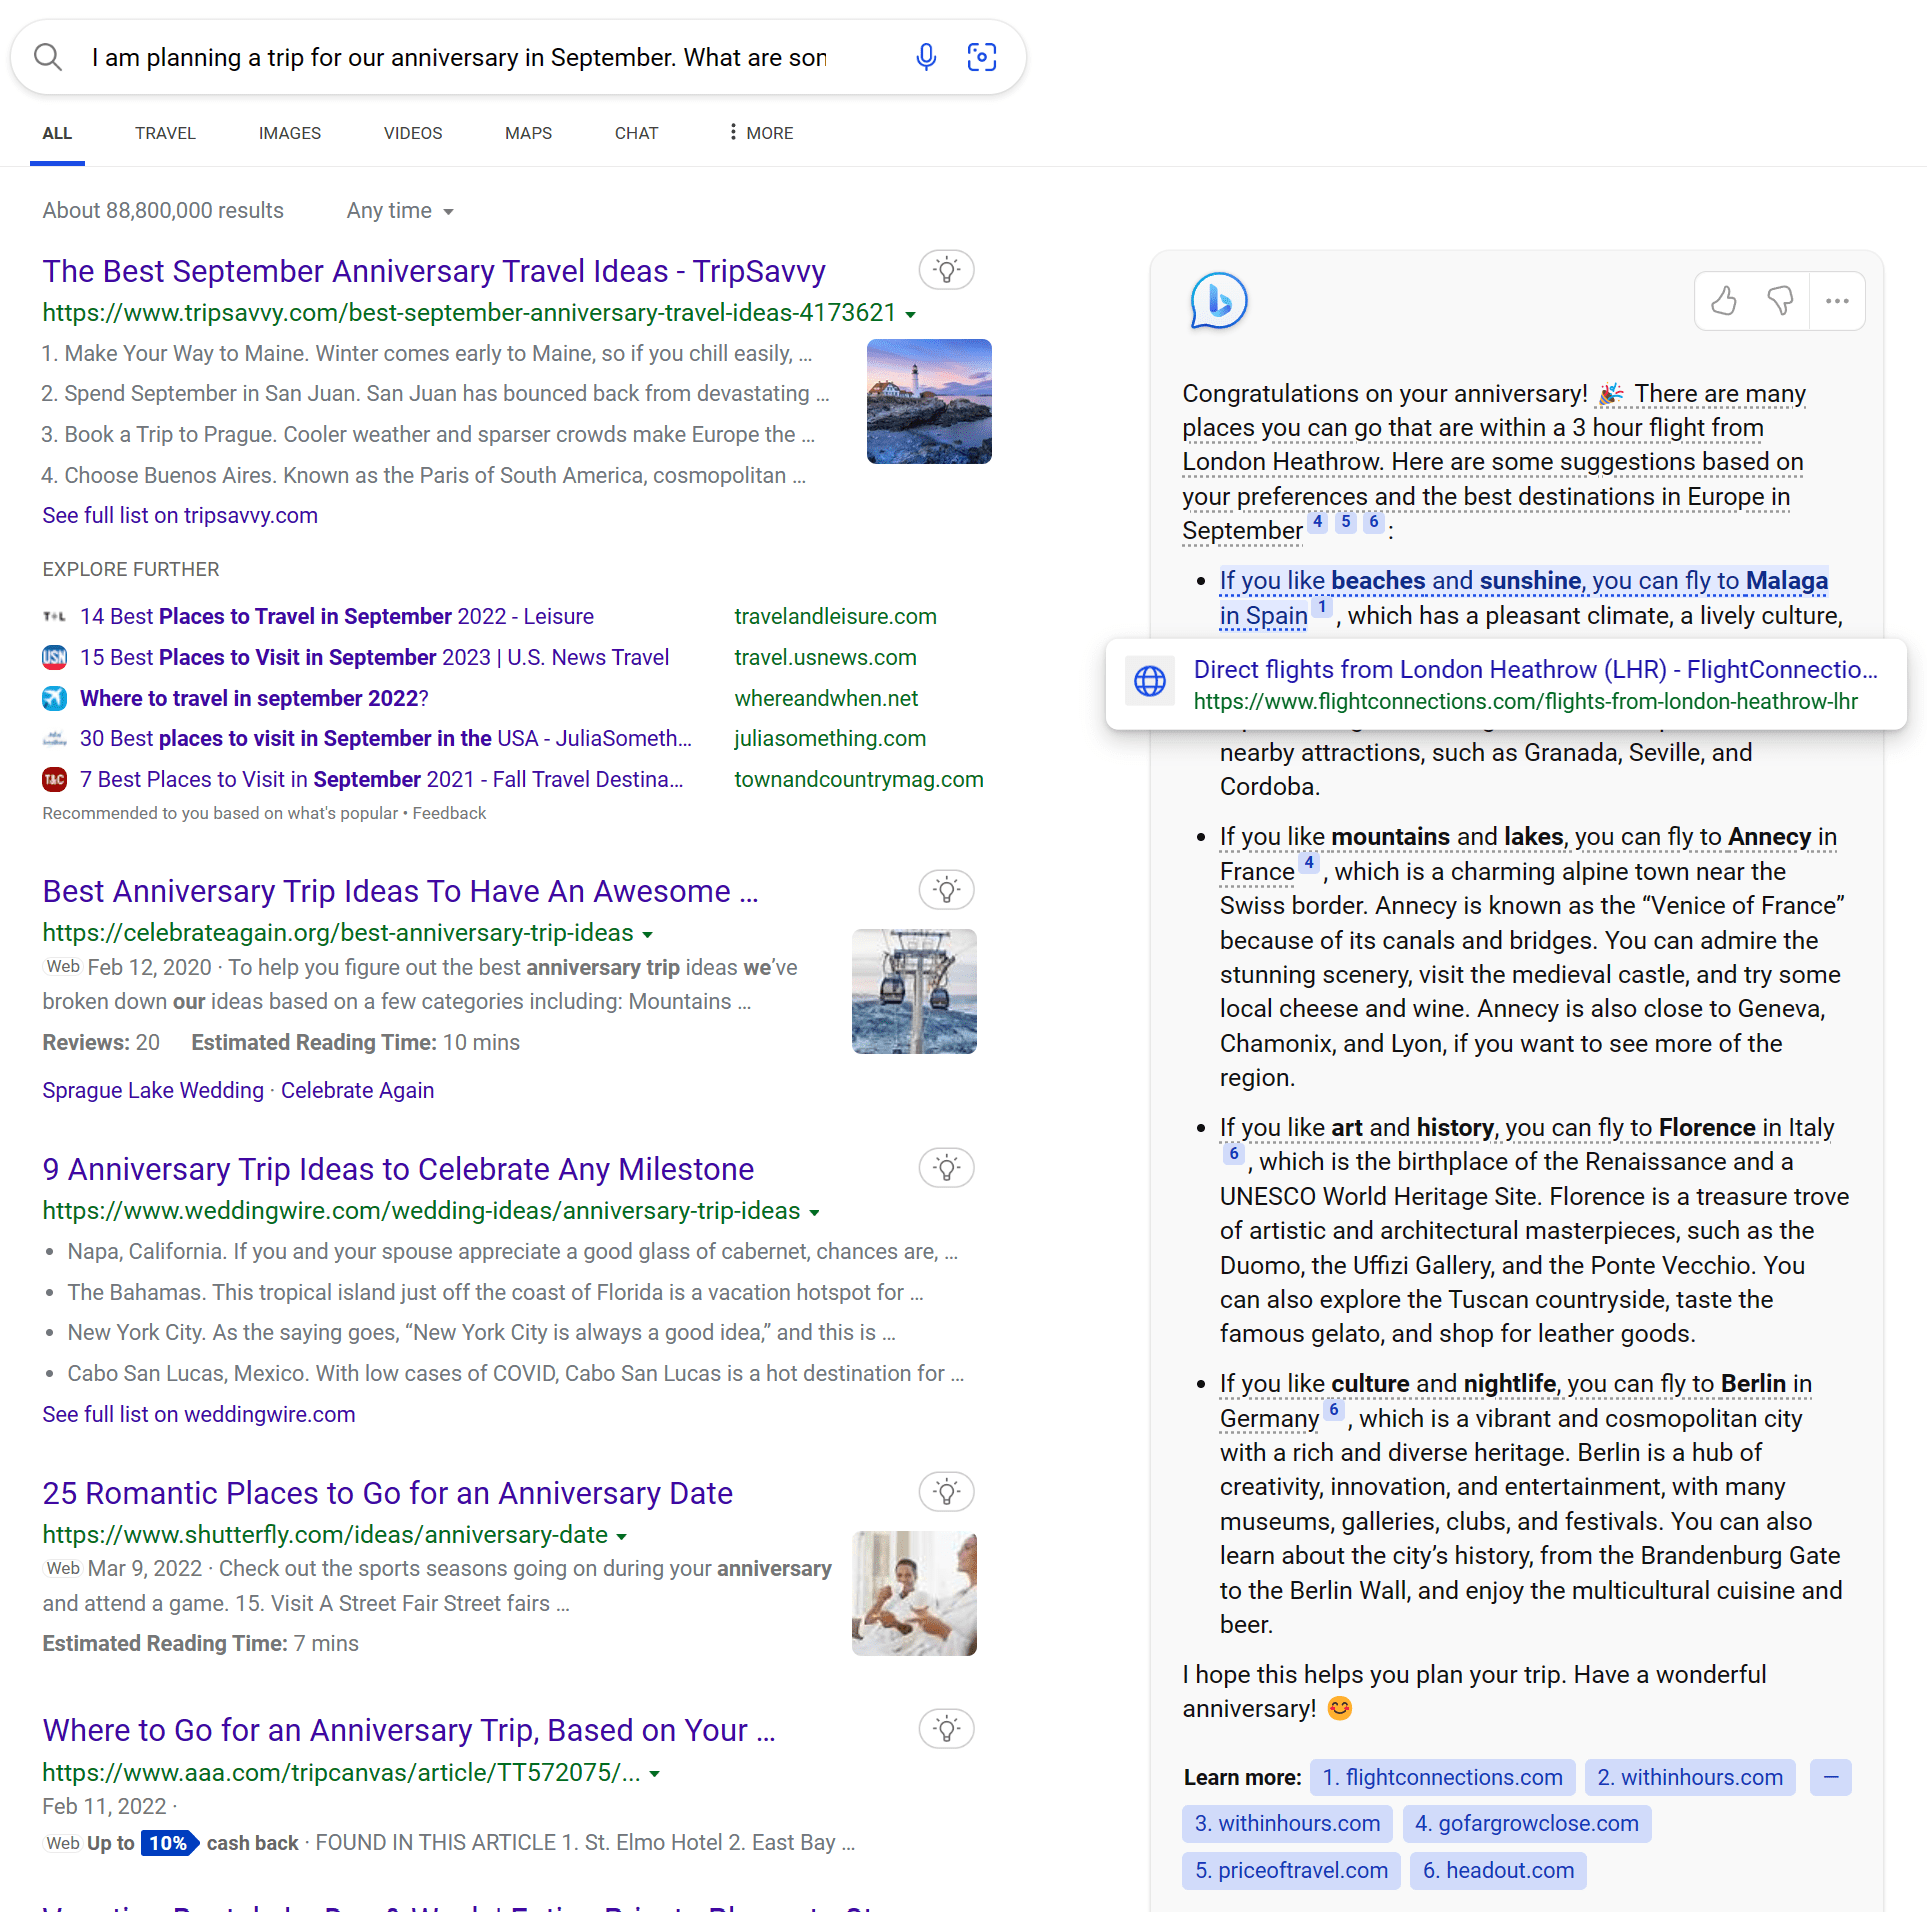 Bing GPT AI search format page side by side